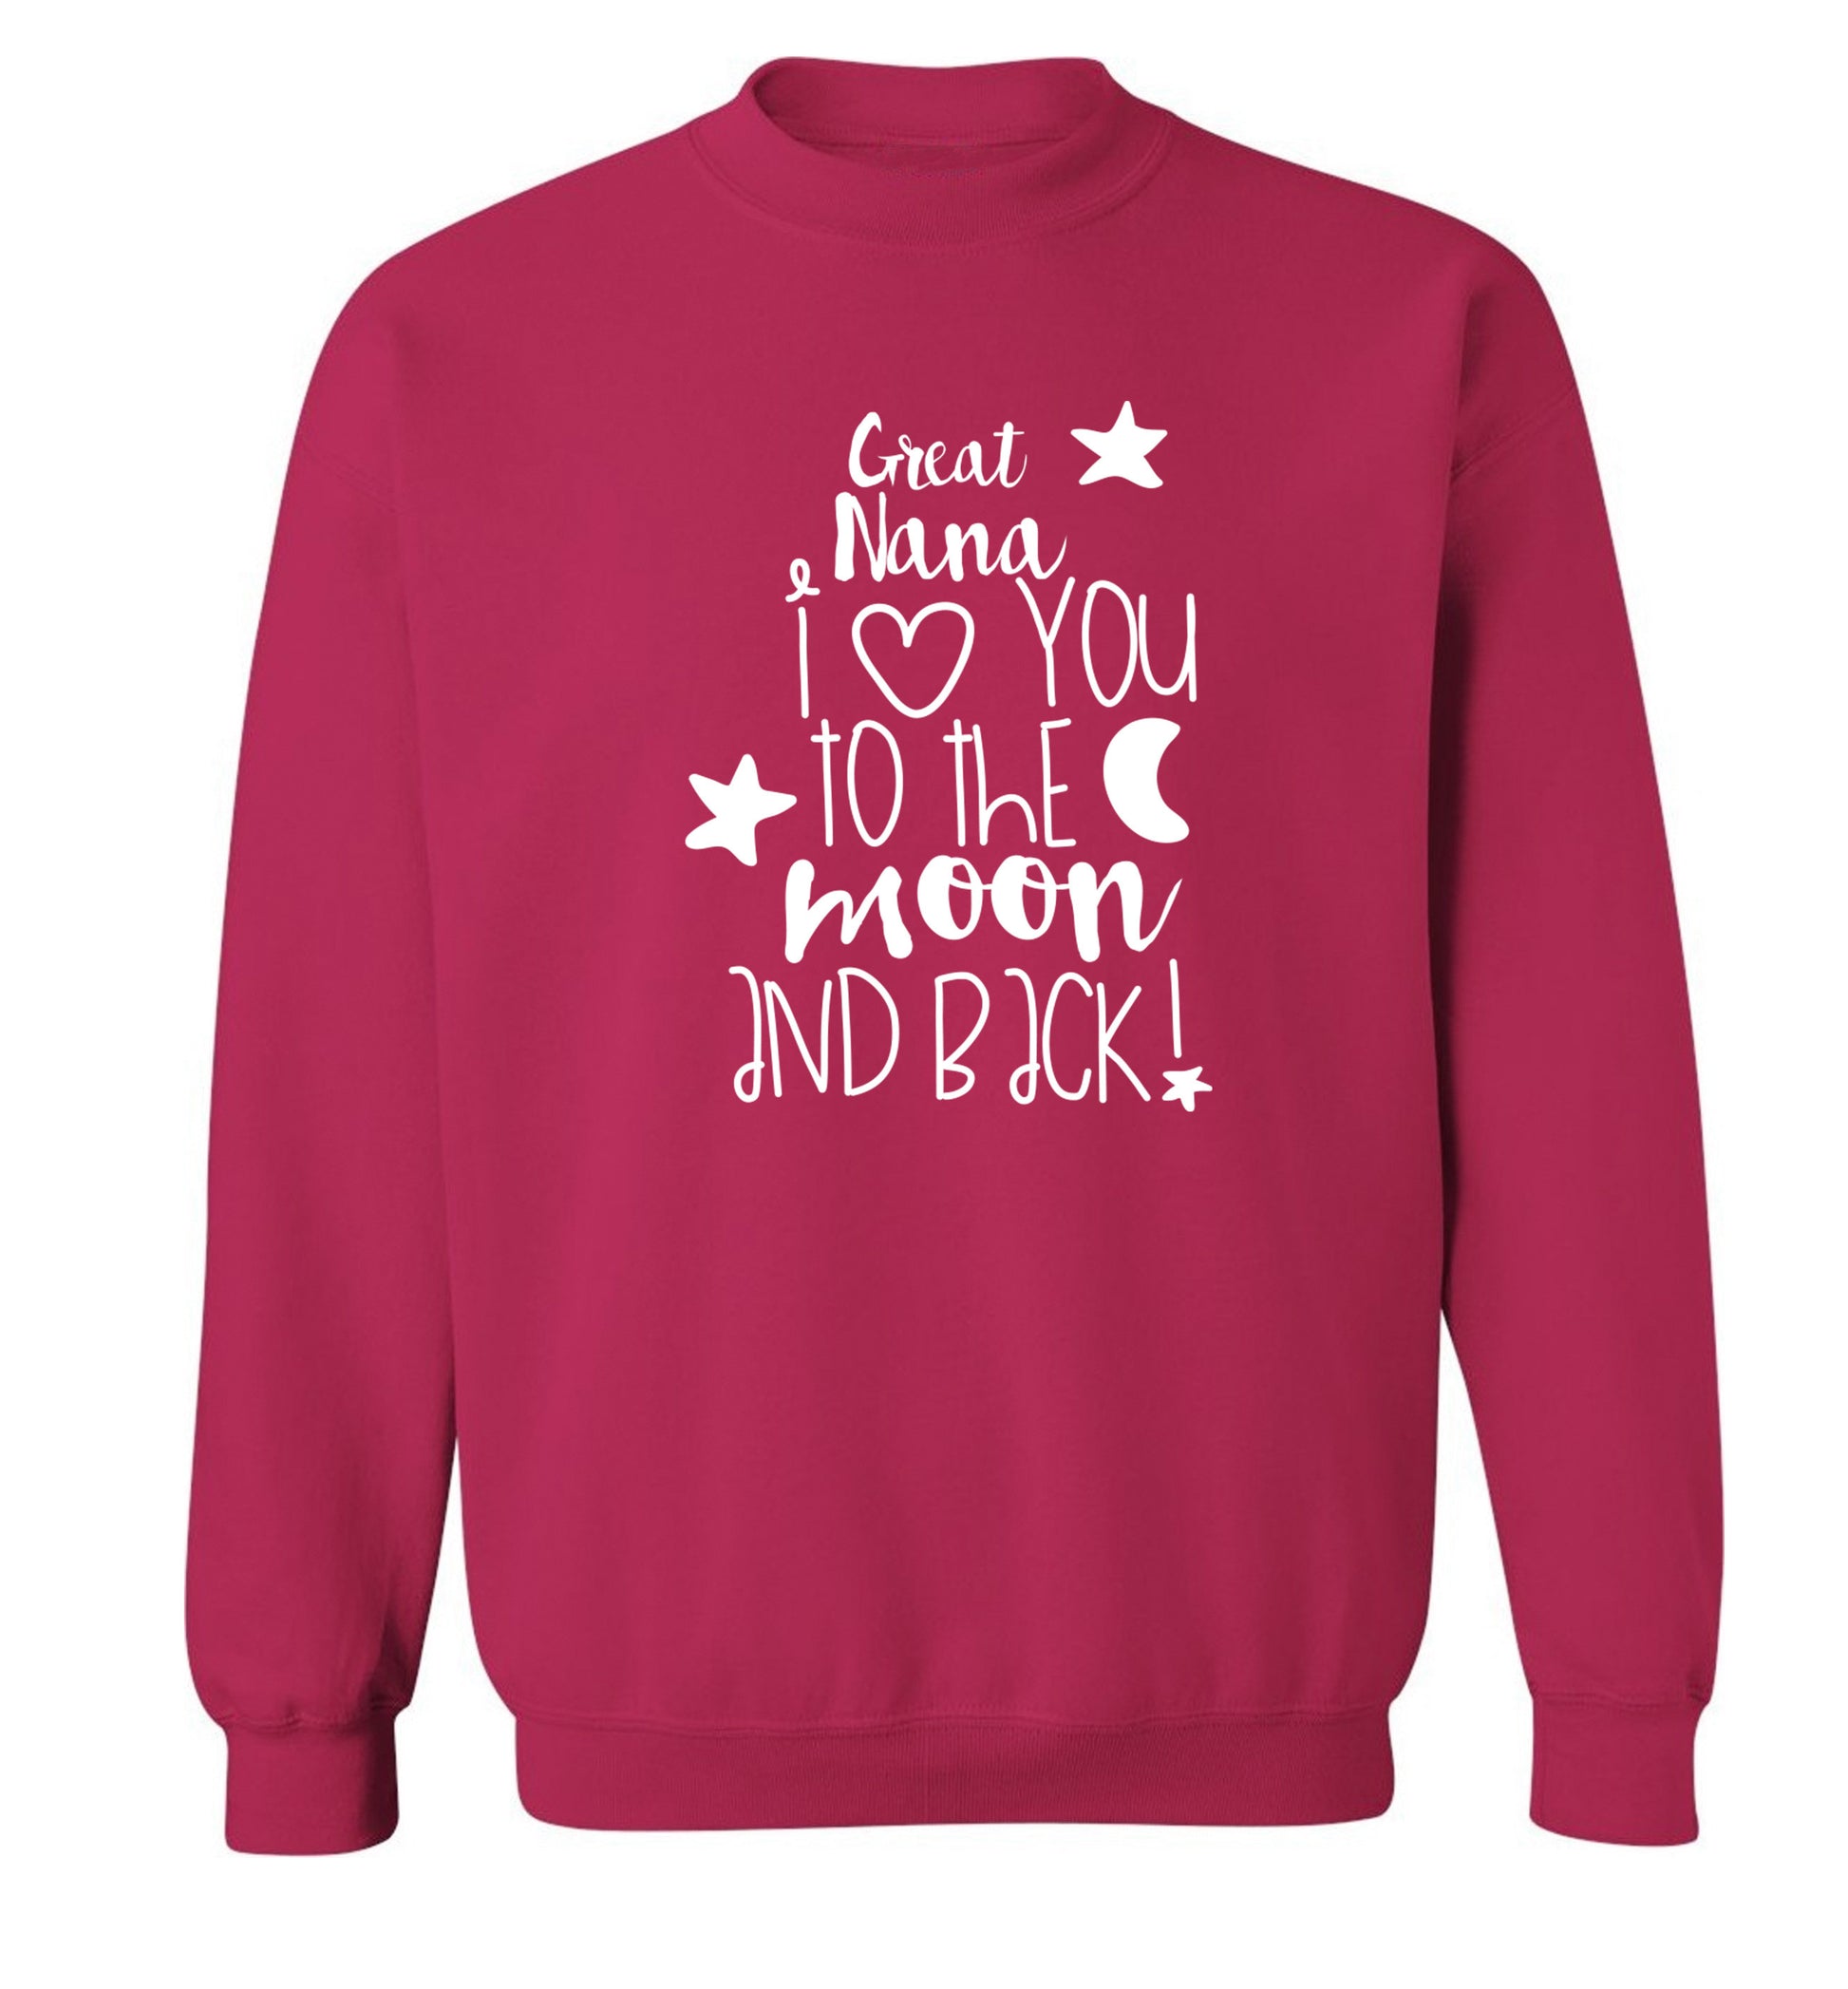 Great Nana I love you to the moon and back Adult's unisex pink  sweater XL